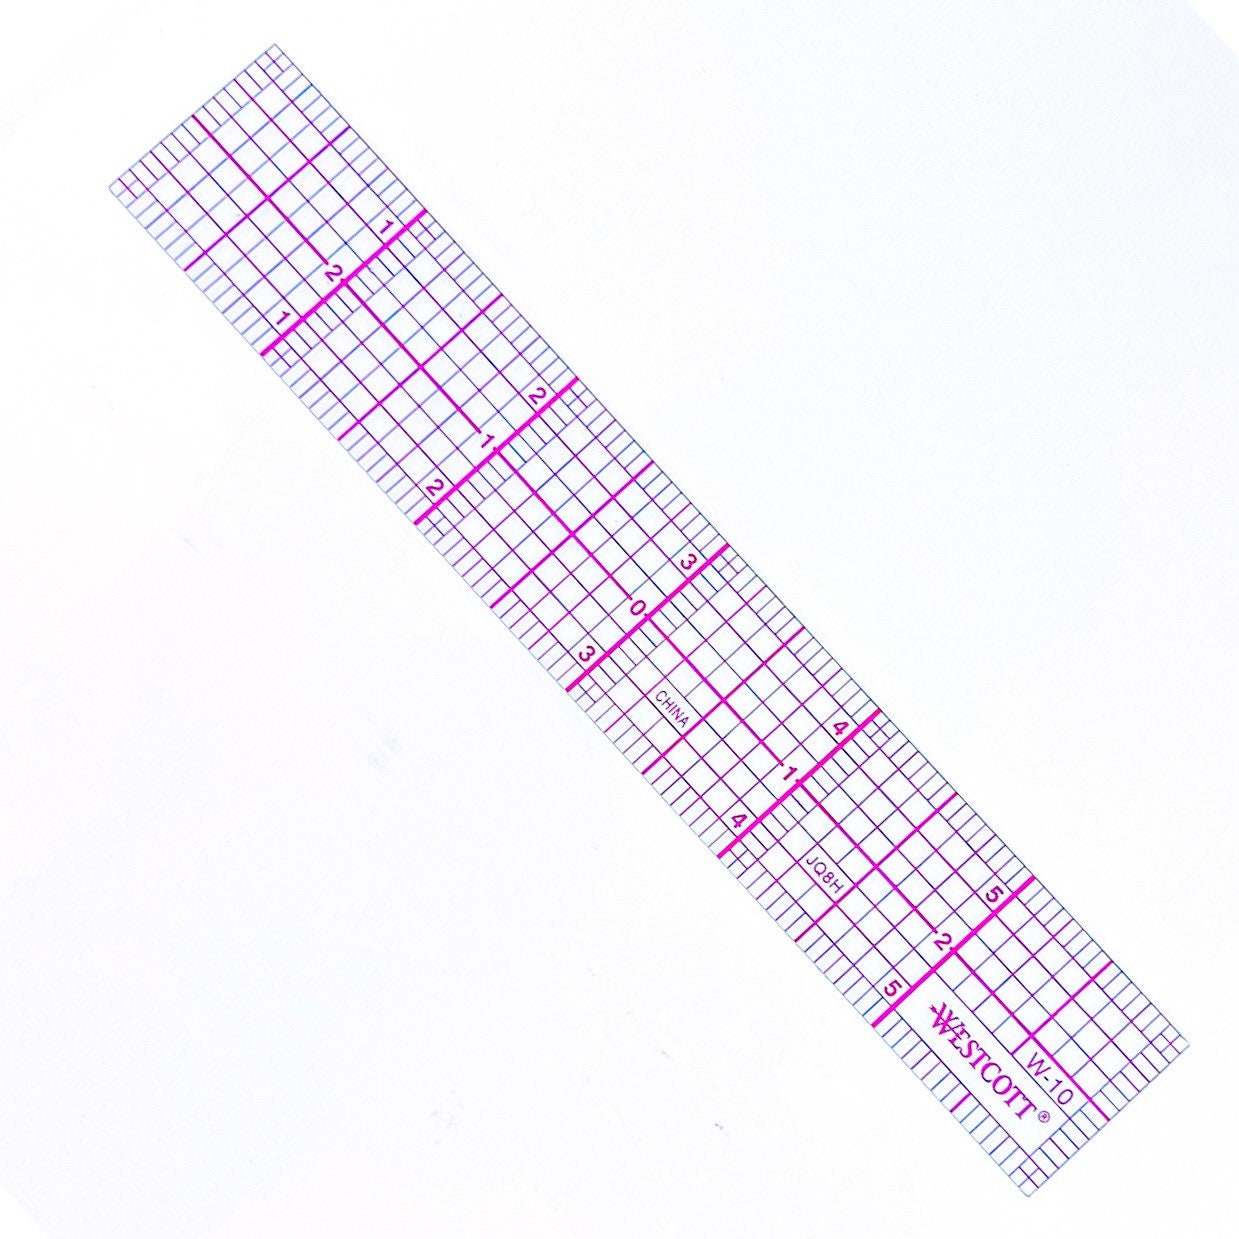  MAGICLULU 24 Pcs Seam Allowance Ruler Sewing Template T Ruler  Magnetic Seam Guide for Sewing Machine Sewing Pencil for Fabric Quilting  Rulers Fabric Quilting Ruler Fixed Edge Abs Clothing : Arts